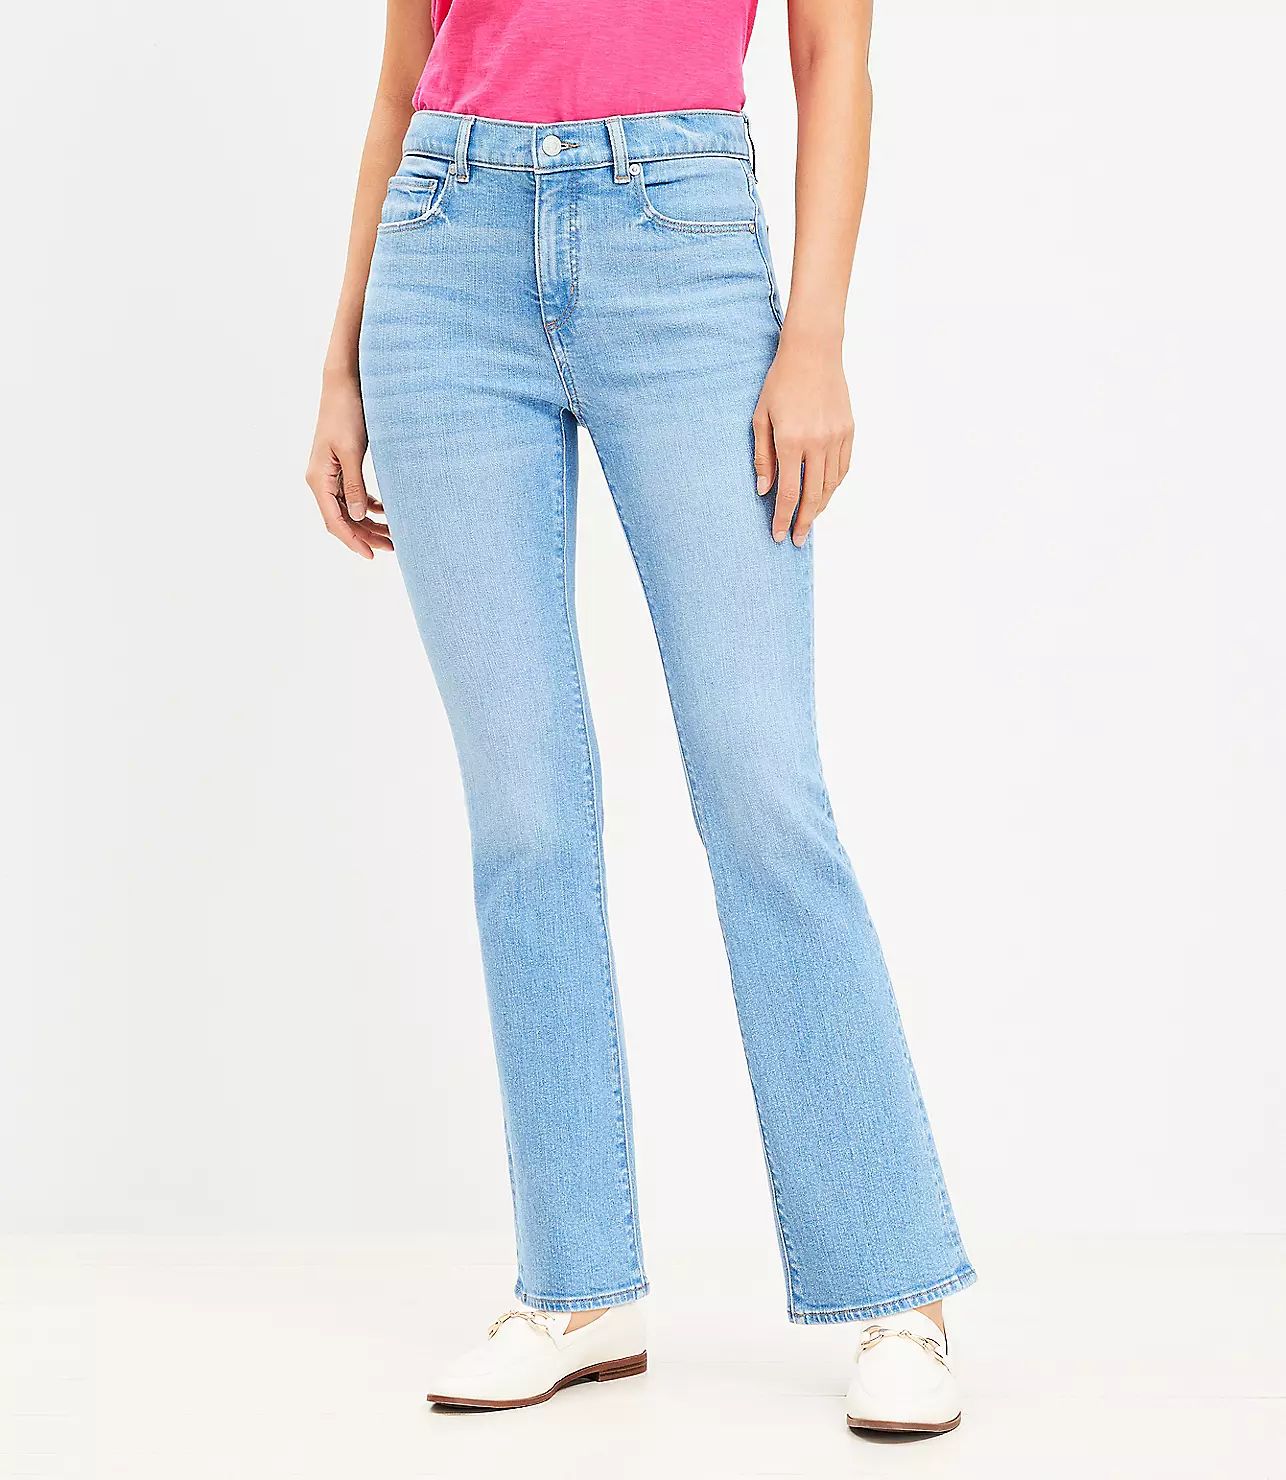 Mid Rise Boot Jeans in Light Wash | LOFT